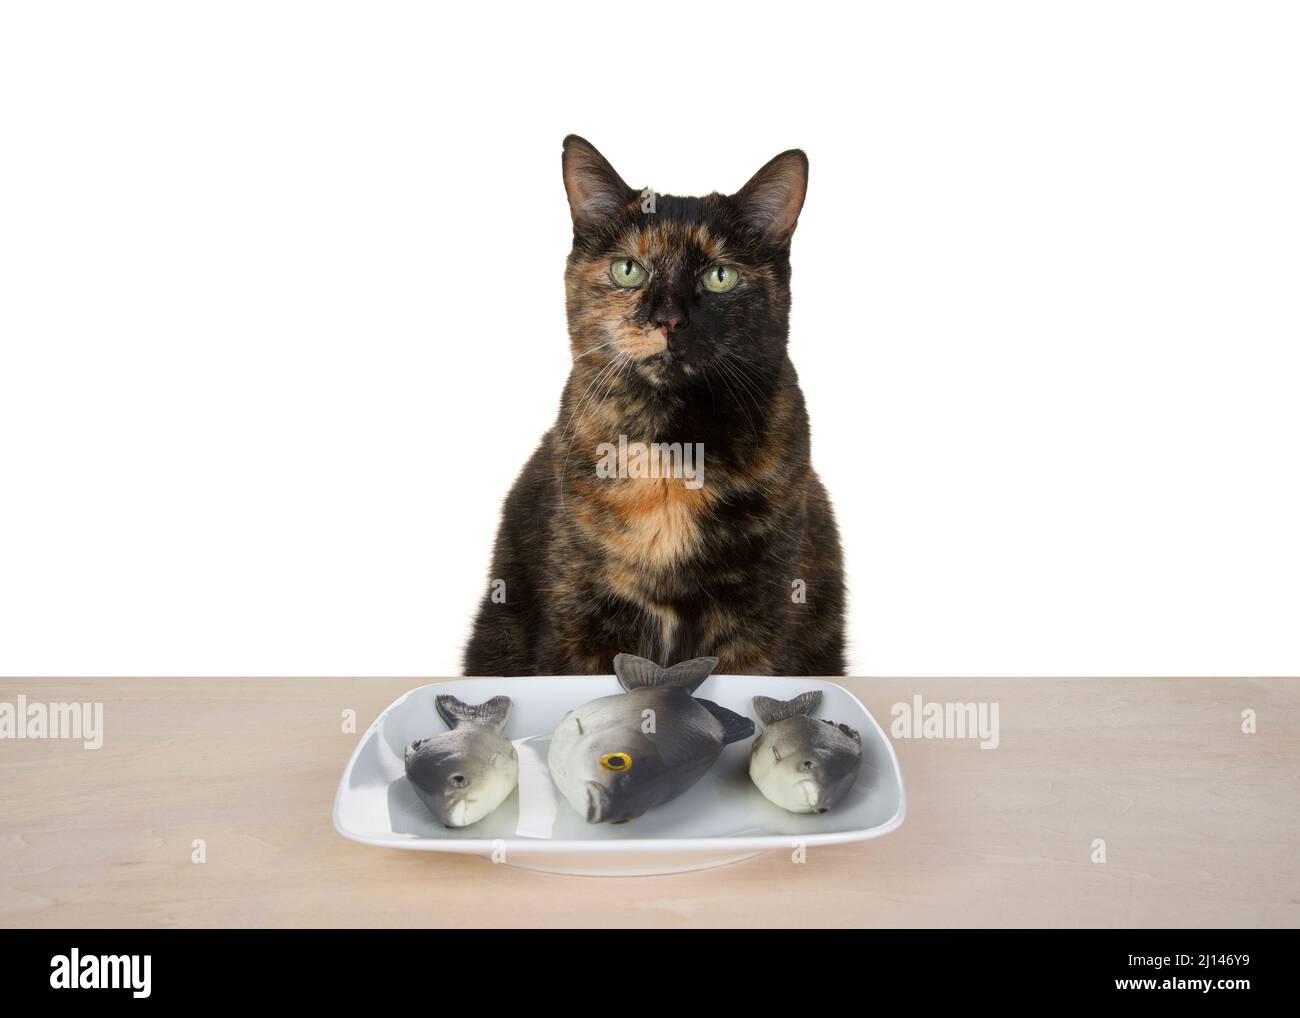 Black and orange torbie tortie tabby cat sitting at a light wood table with square white porcelain plate with trout. Cat looking at viewer, isolated o Stock Photo